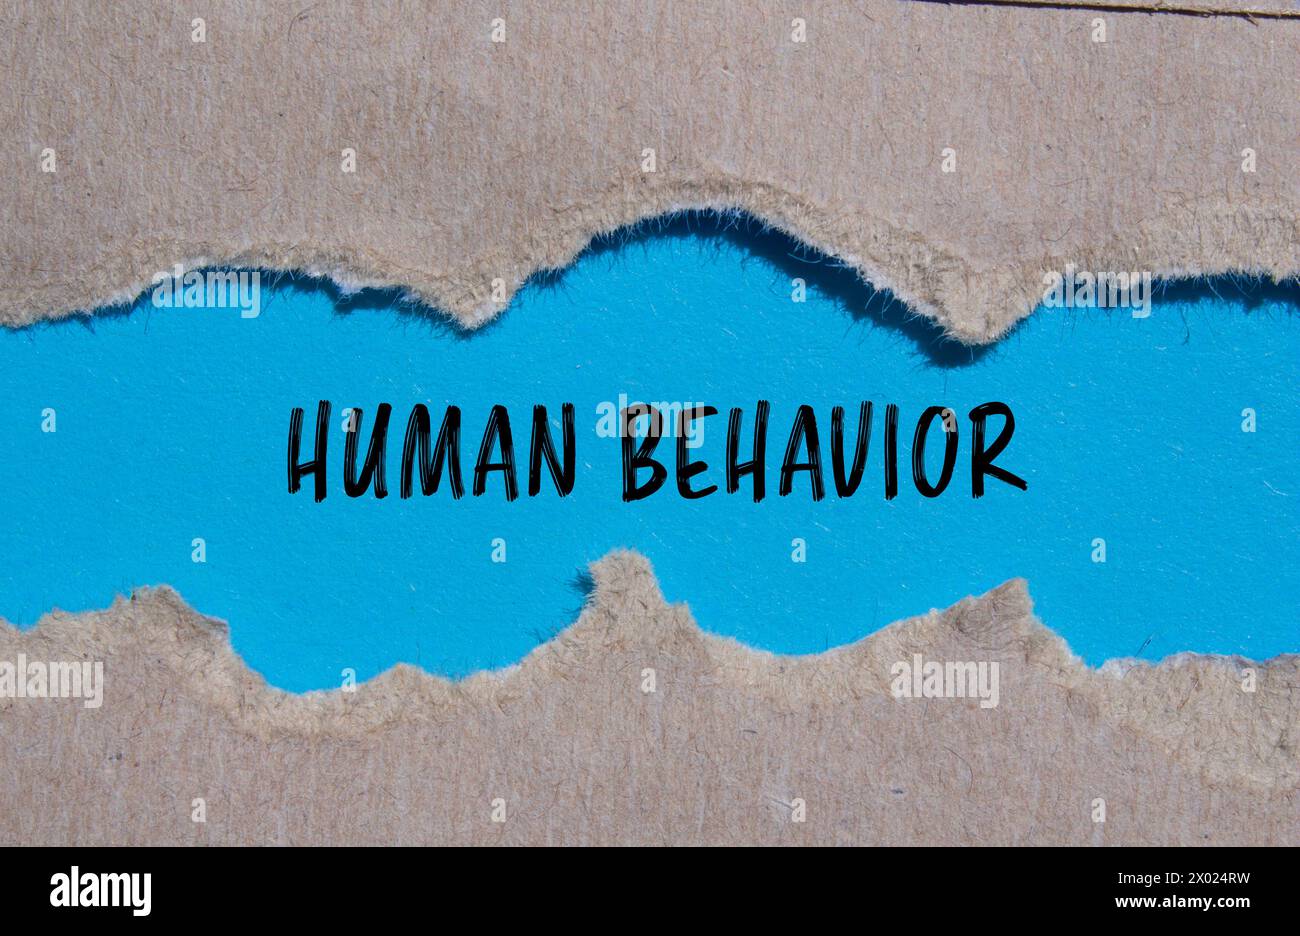 Human behavior words written on ripped paper with blue background. Conceptual symbol. Copy space. Stock Photo